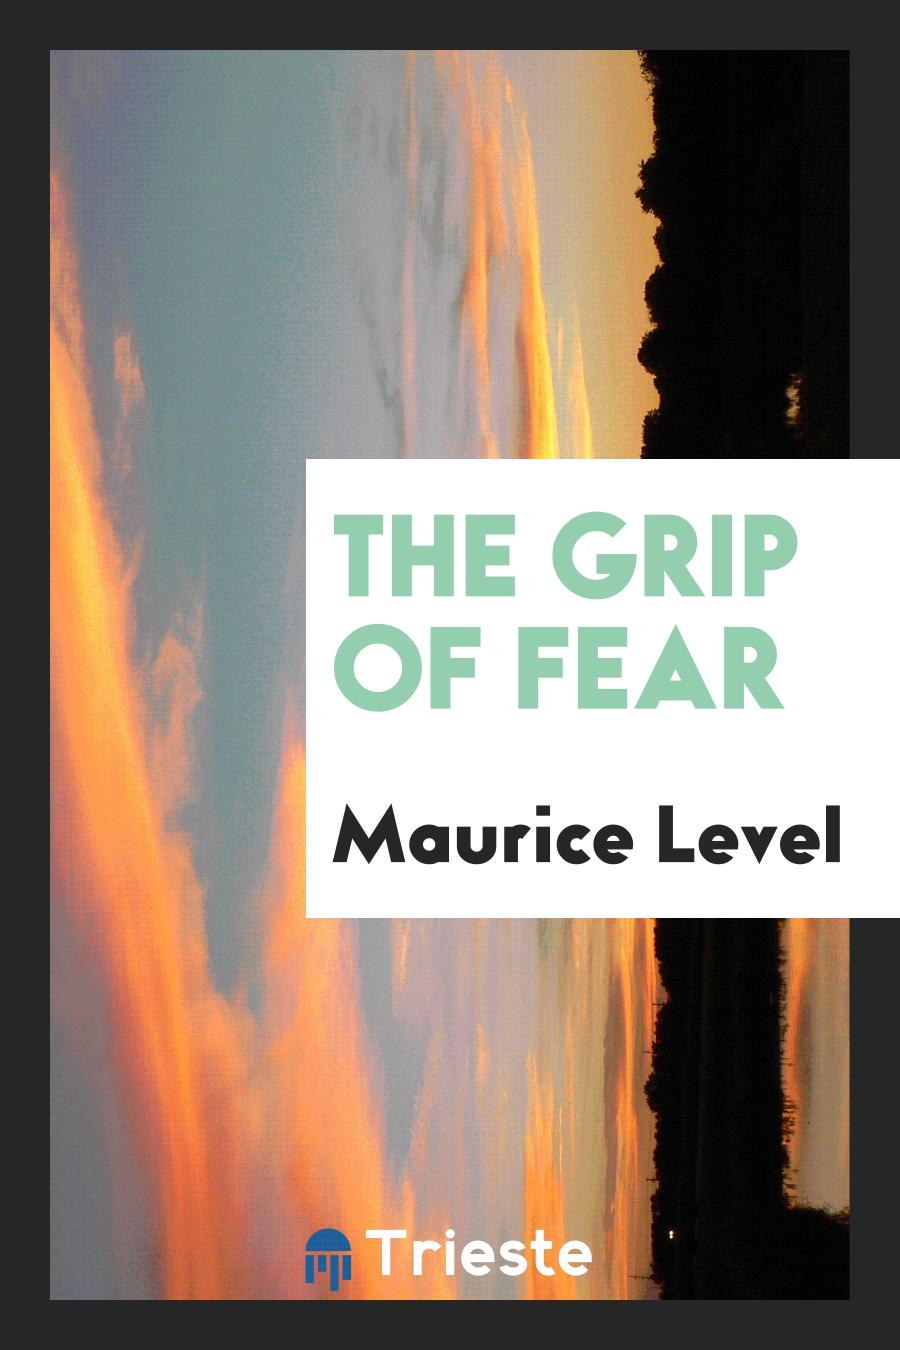 The Grip of Fear